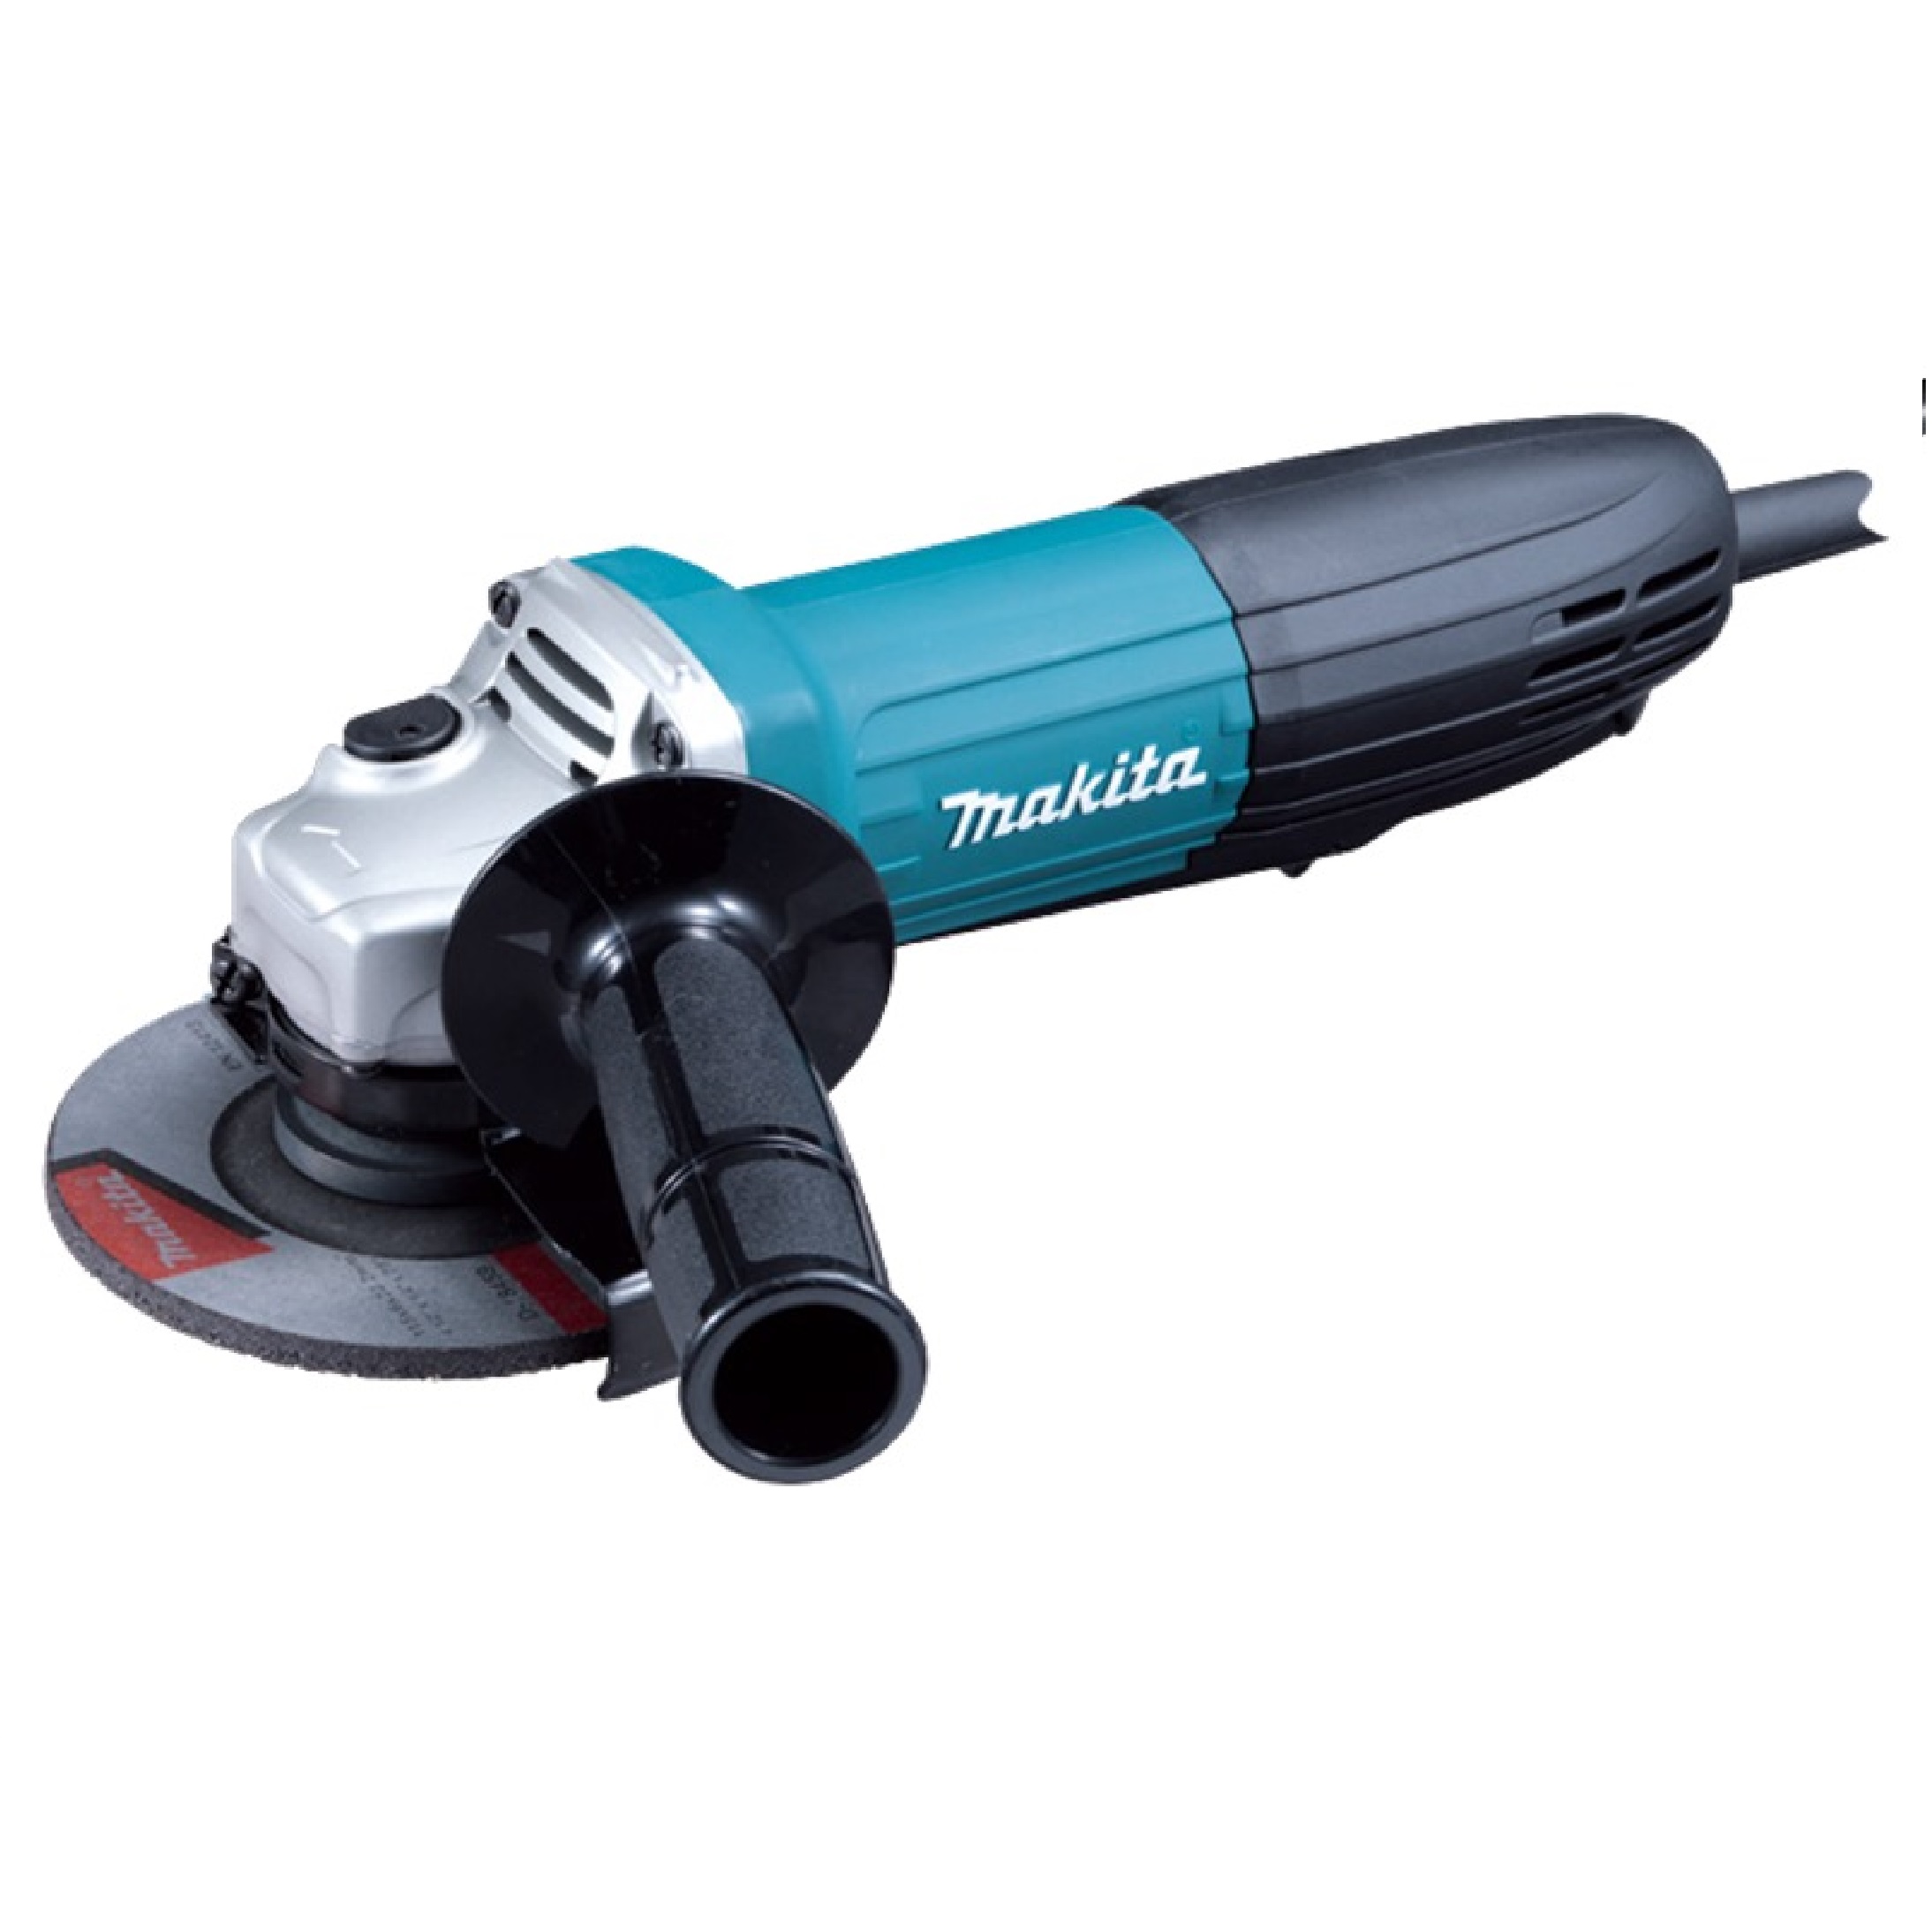 Makita GA4034 100MM (4") Angle Grinder With Paddle Switch 720W